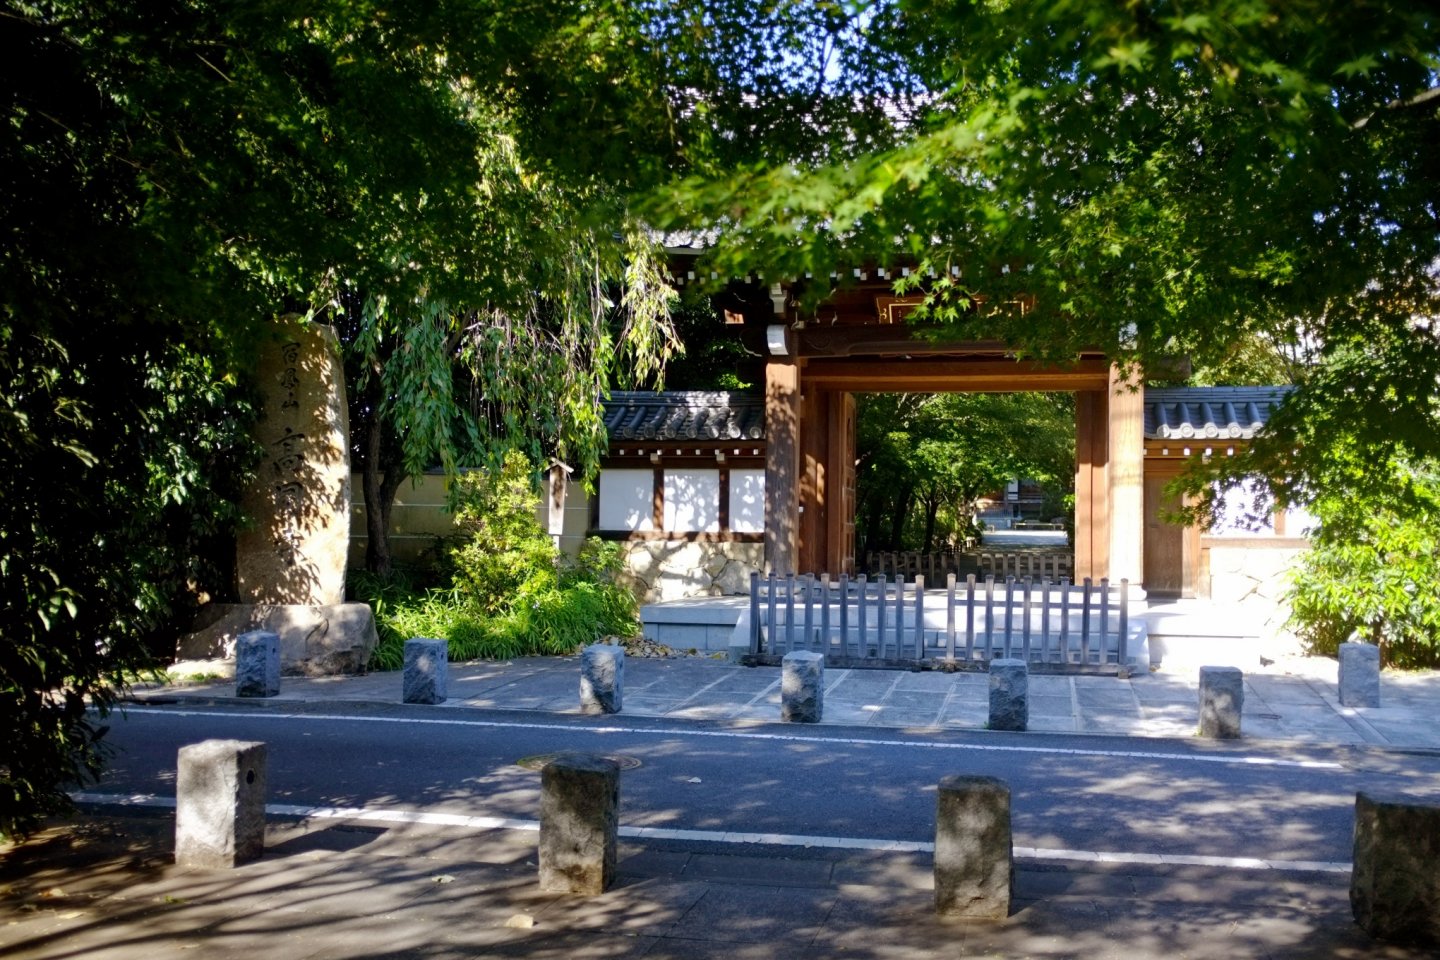 Koenji Temple, the famous temple that lends its name to the district.